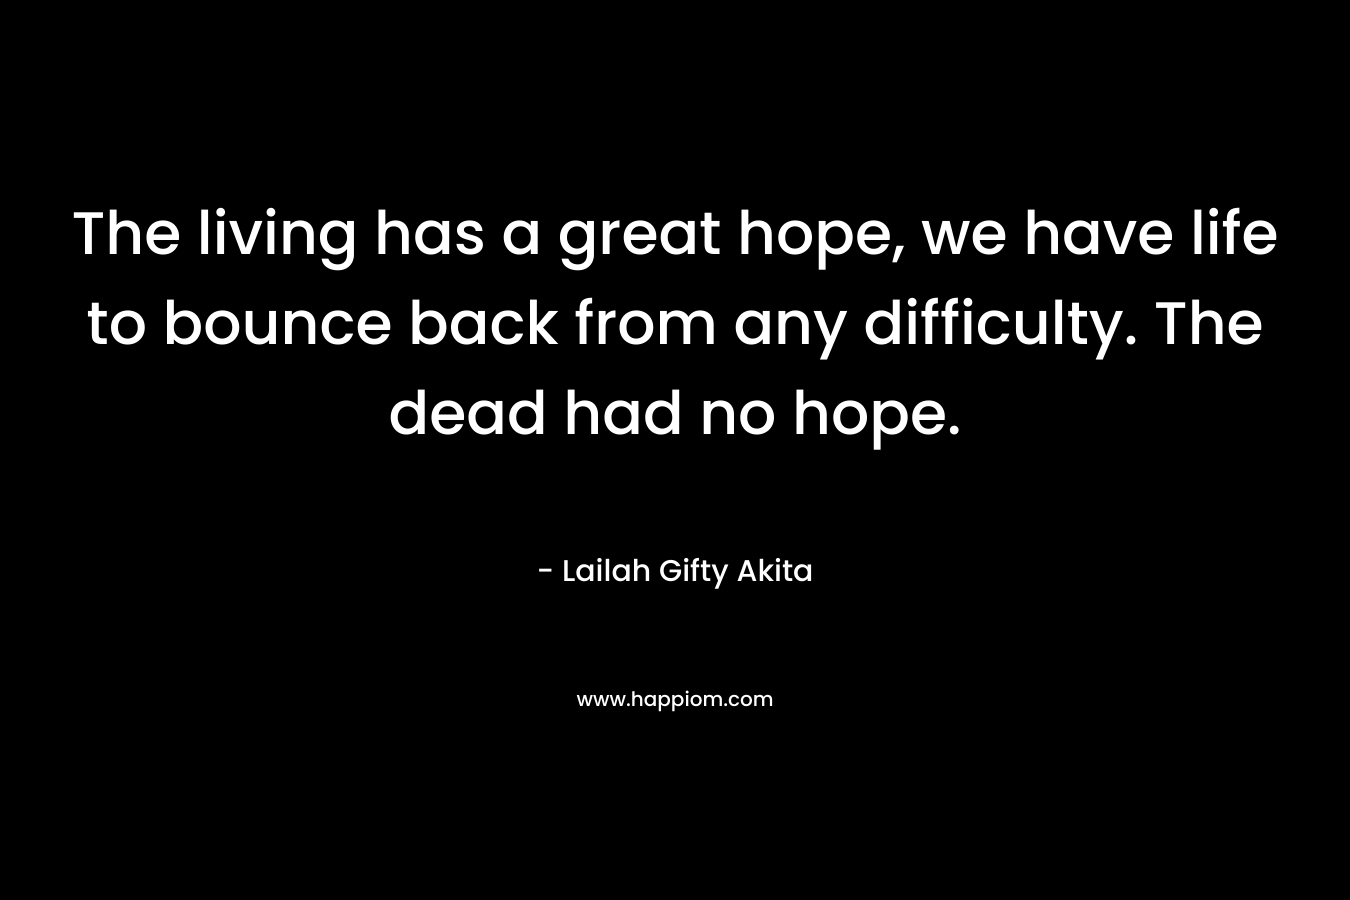 The living has a great hope, we have life to bounce back from any difficulty. The dead had no hope.